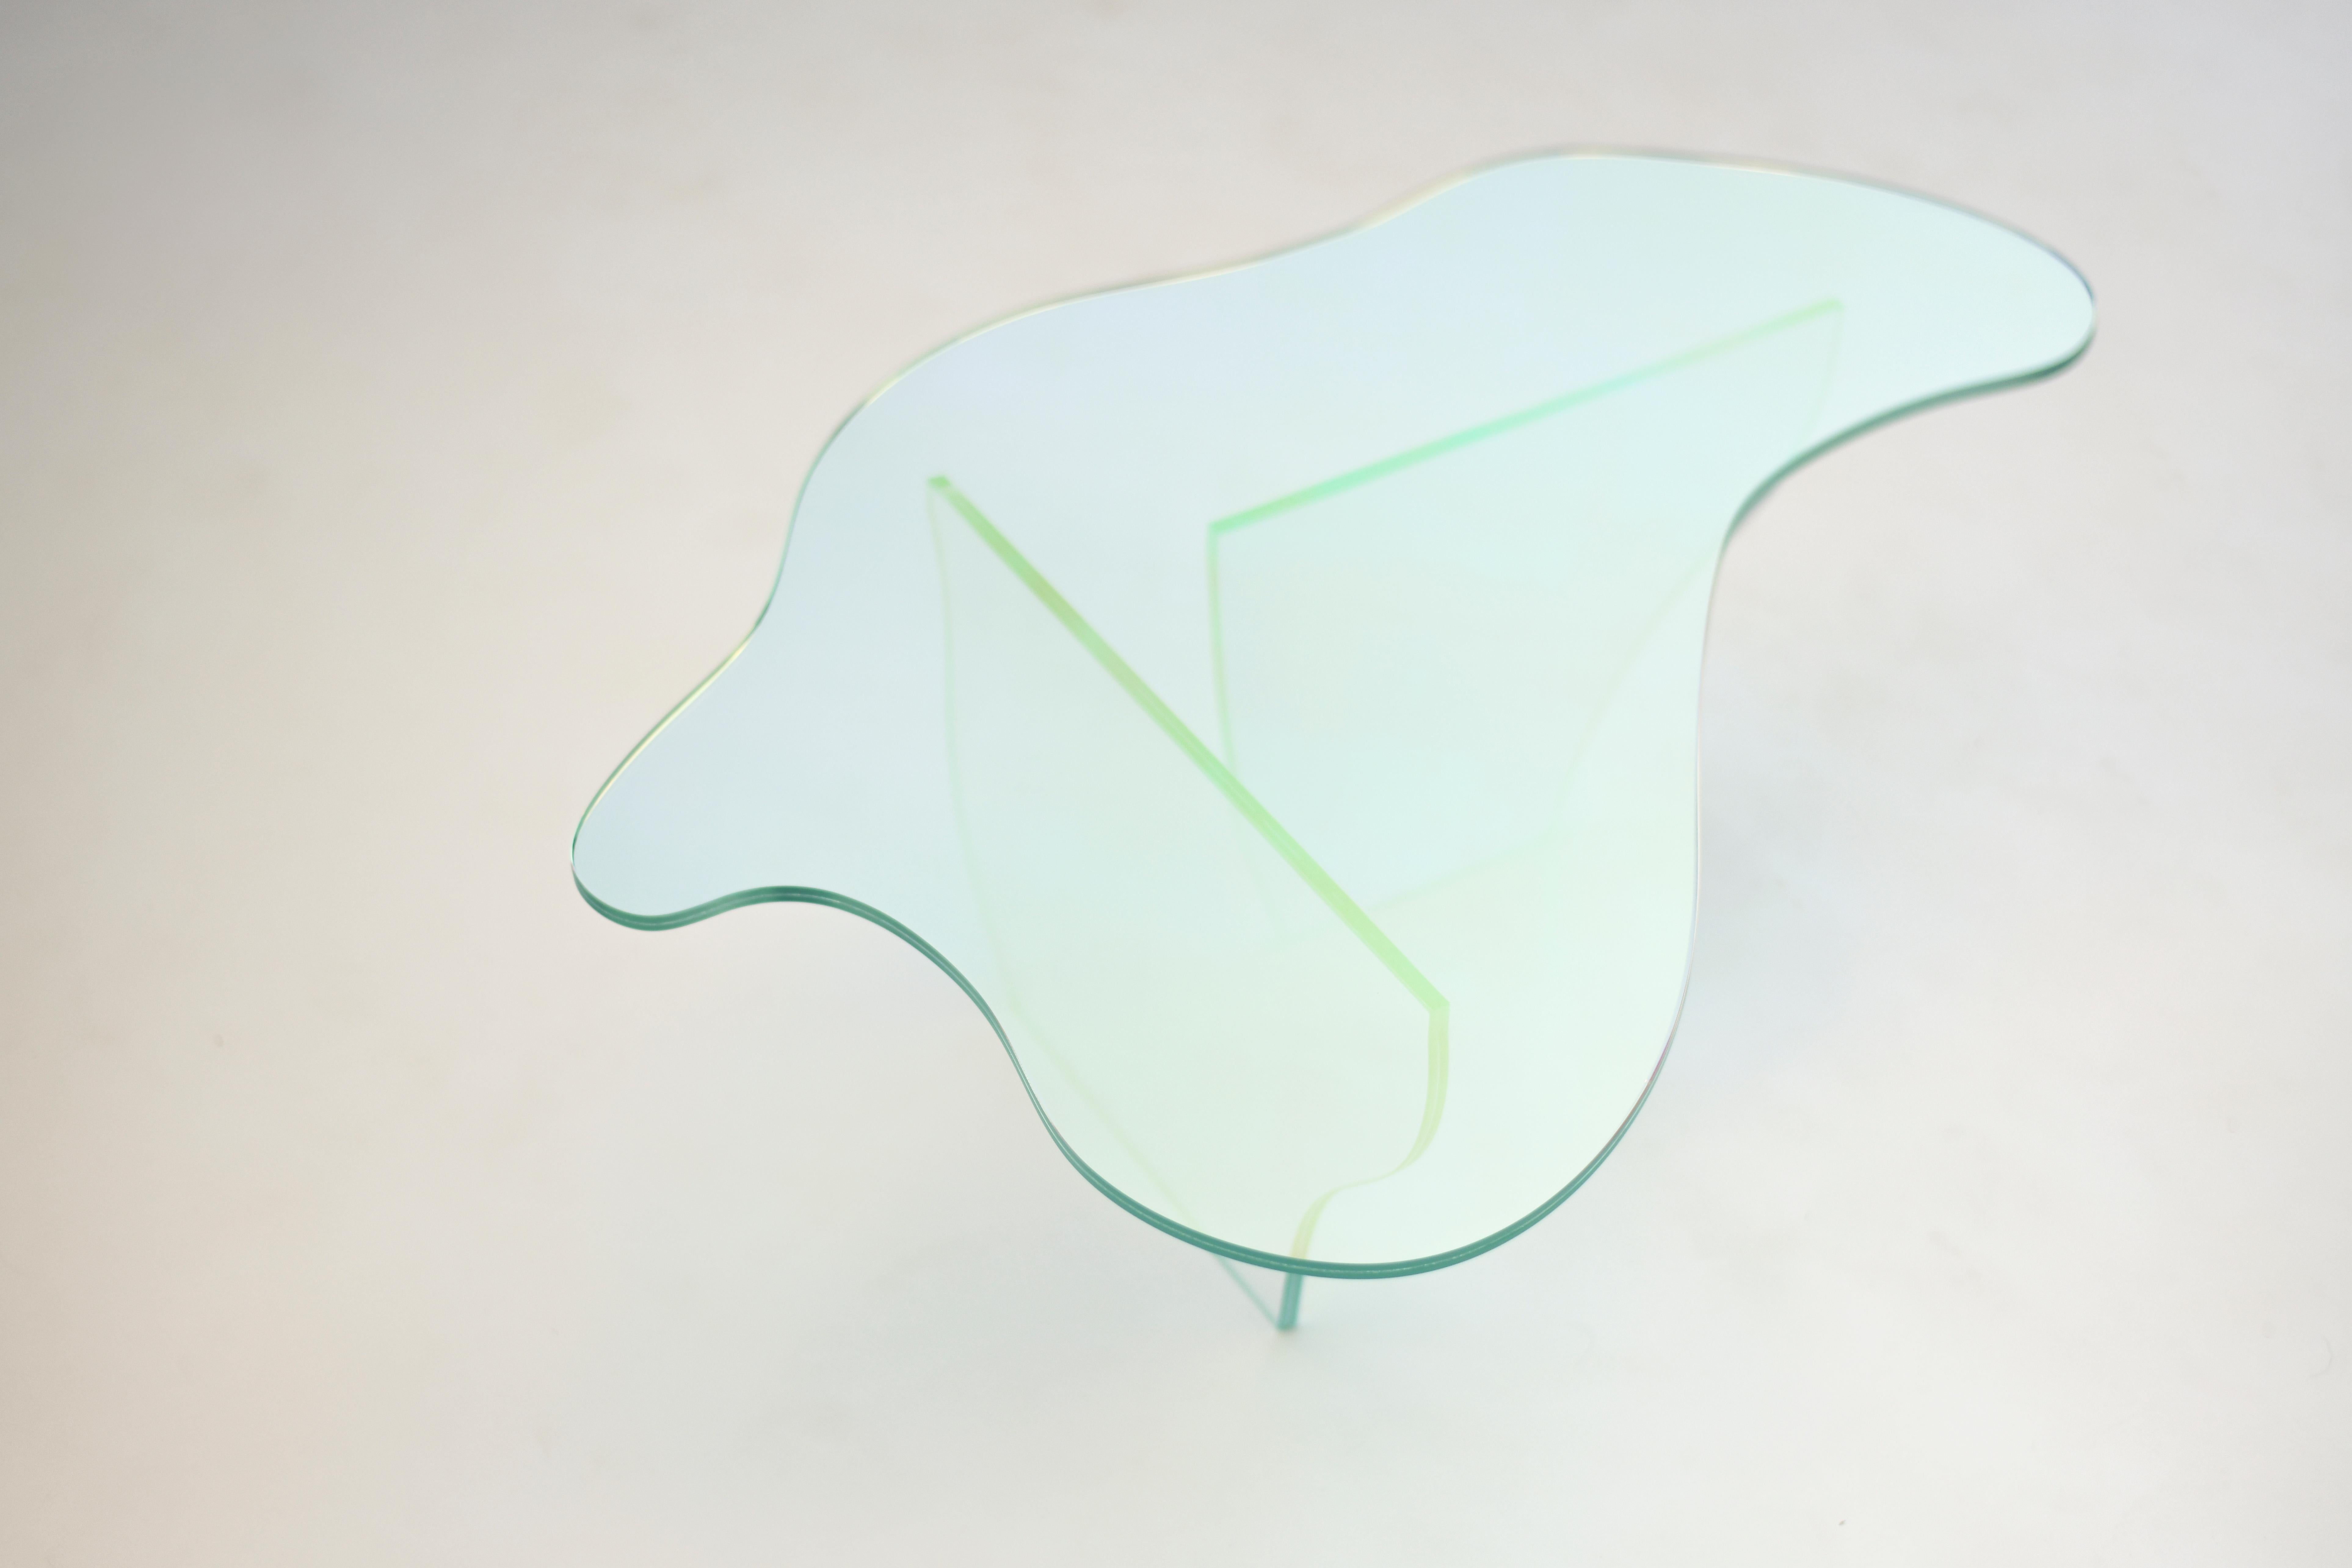 Glass table by Brajak Vitberg
Materials: Glass, Dichroic film
Dimensions: 87 x 57 x 30 cm

Bijelic and Brajak are two architects from Ljubljana, Slovenia.
They are striving to design craft elements and make them timeless through experimental